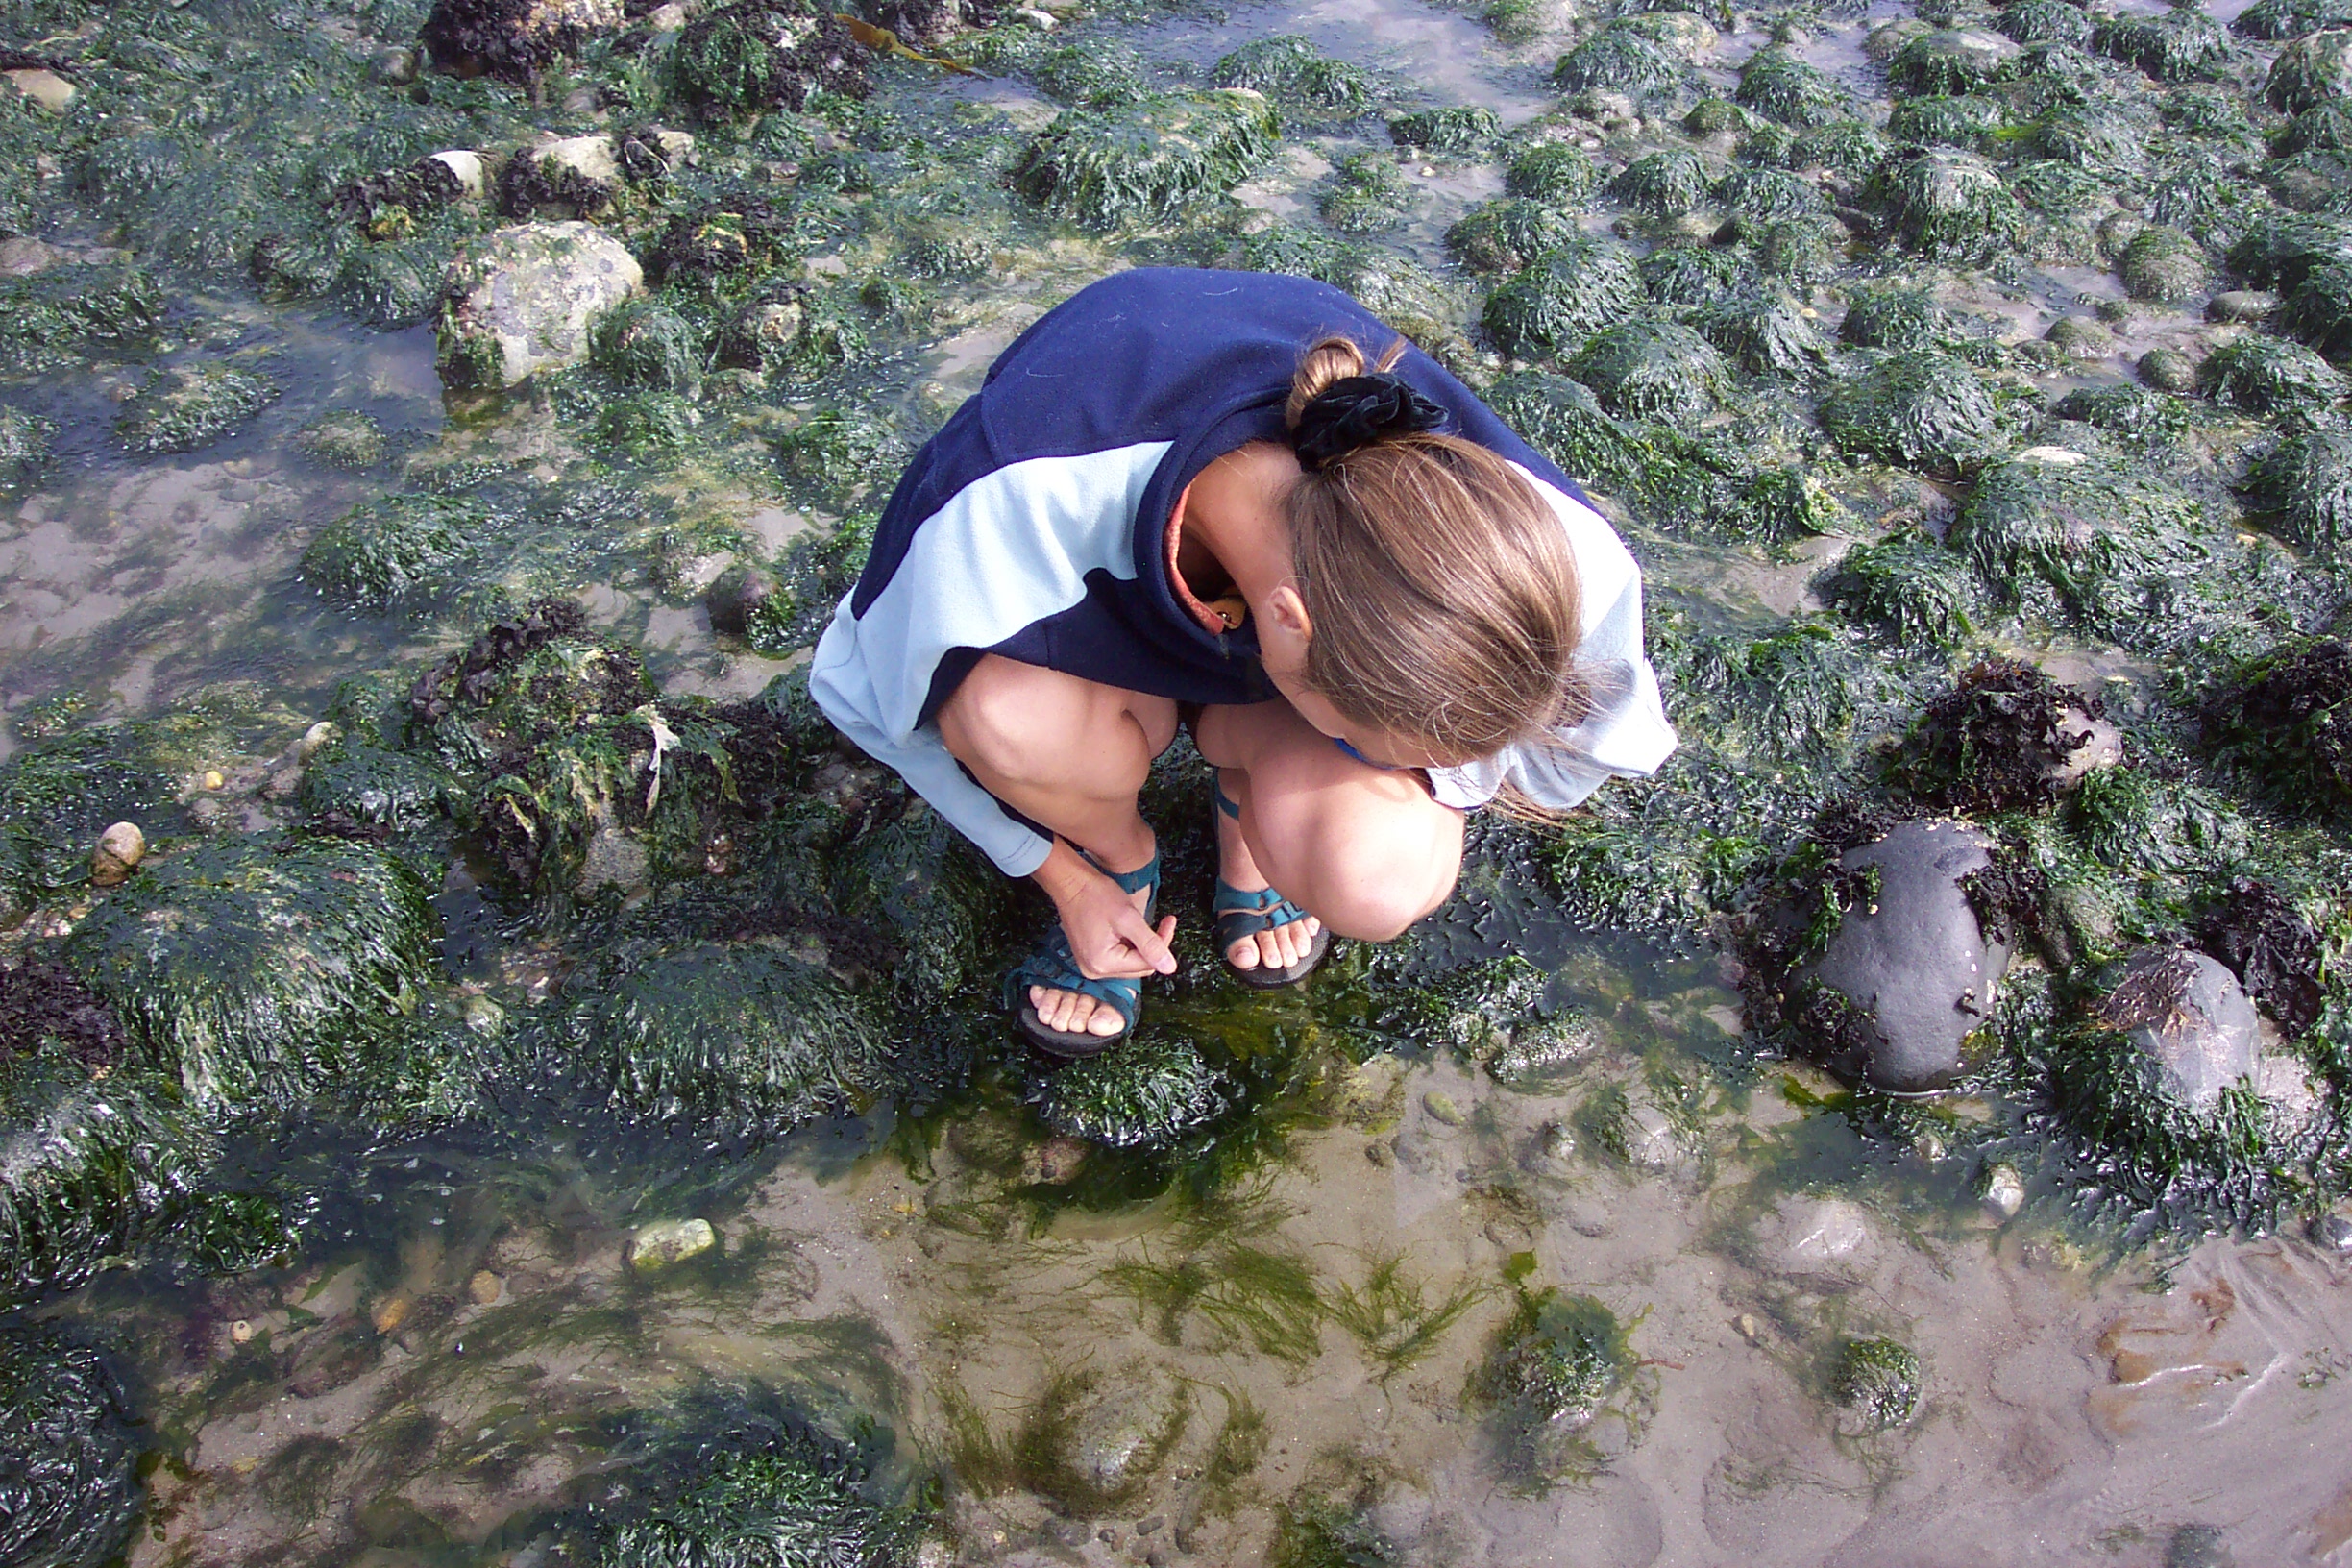 We went to the beach at low tide to explore the tide pools.